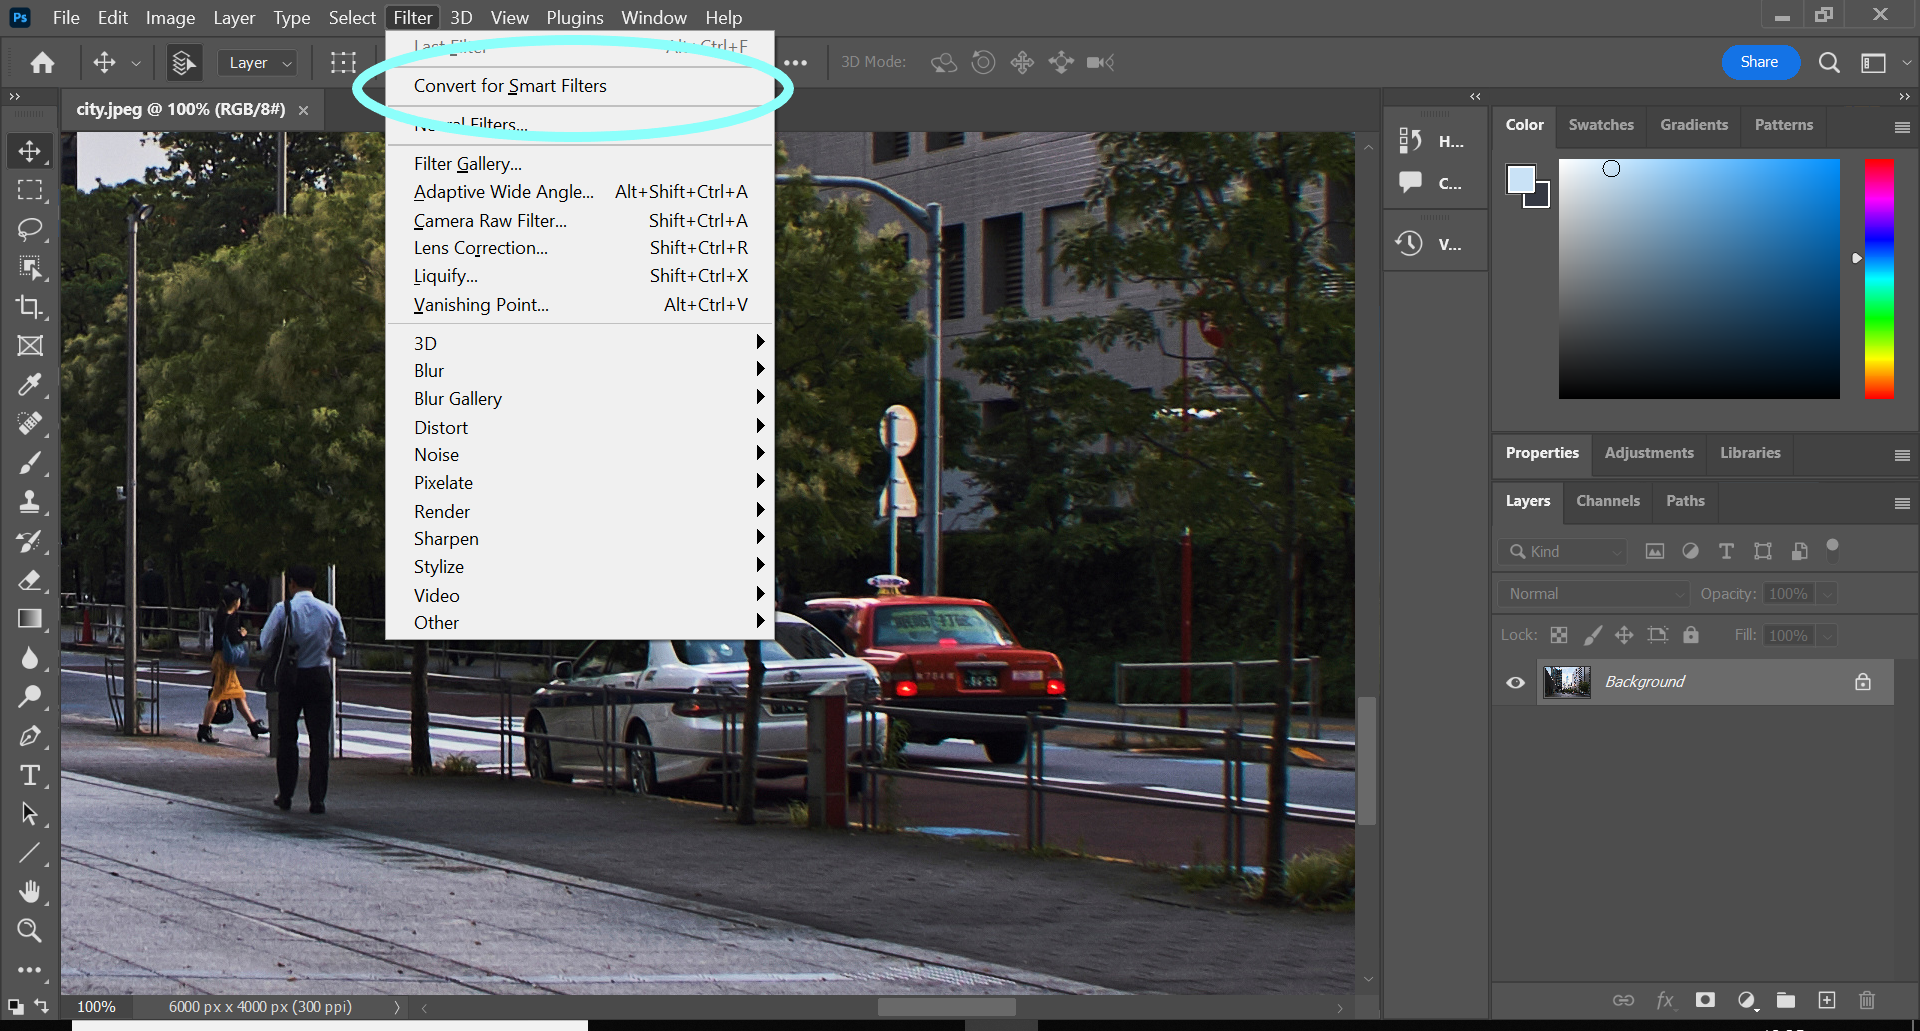 How to sharpen an image in Photoshop